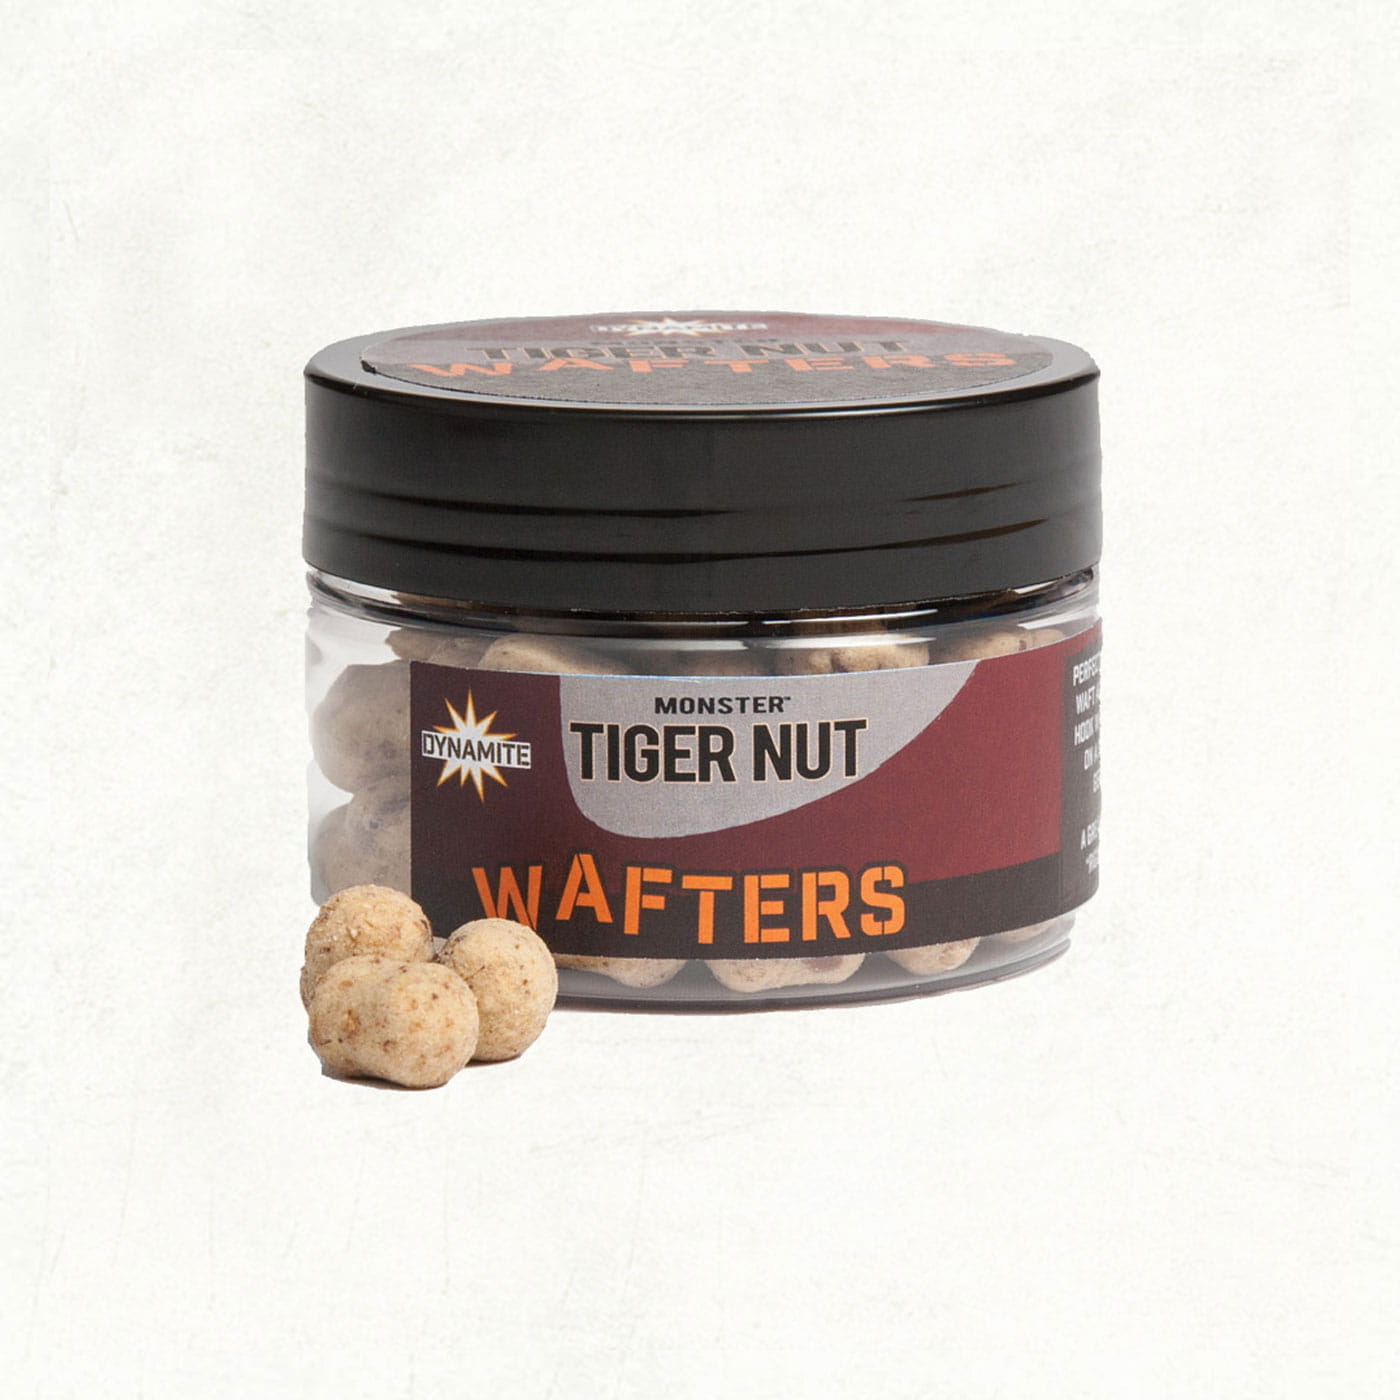 Tiger Nuts Carp Fishing Bait 100g of Tiger Nuts fully prepared